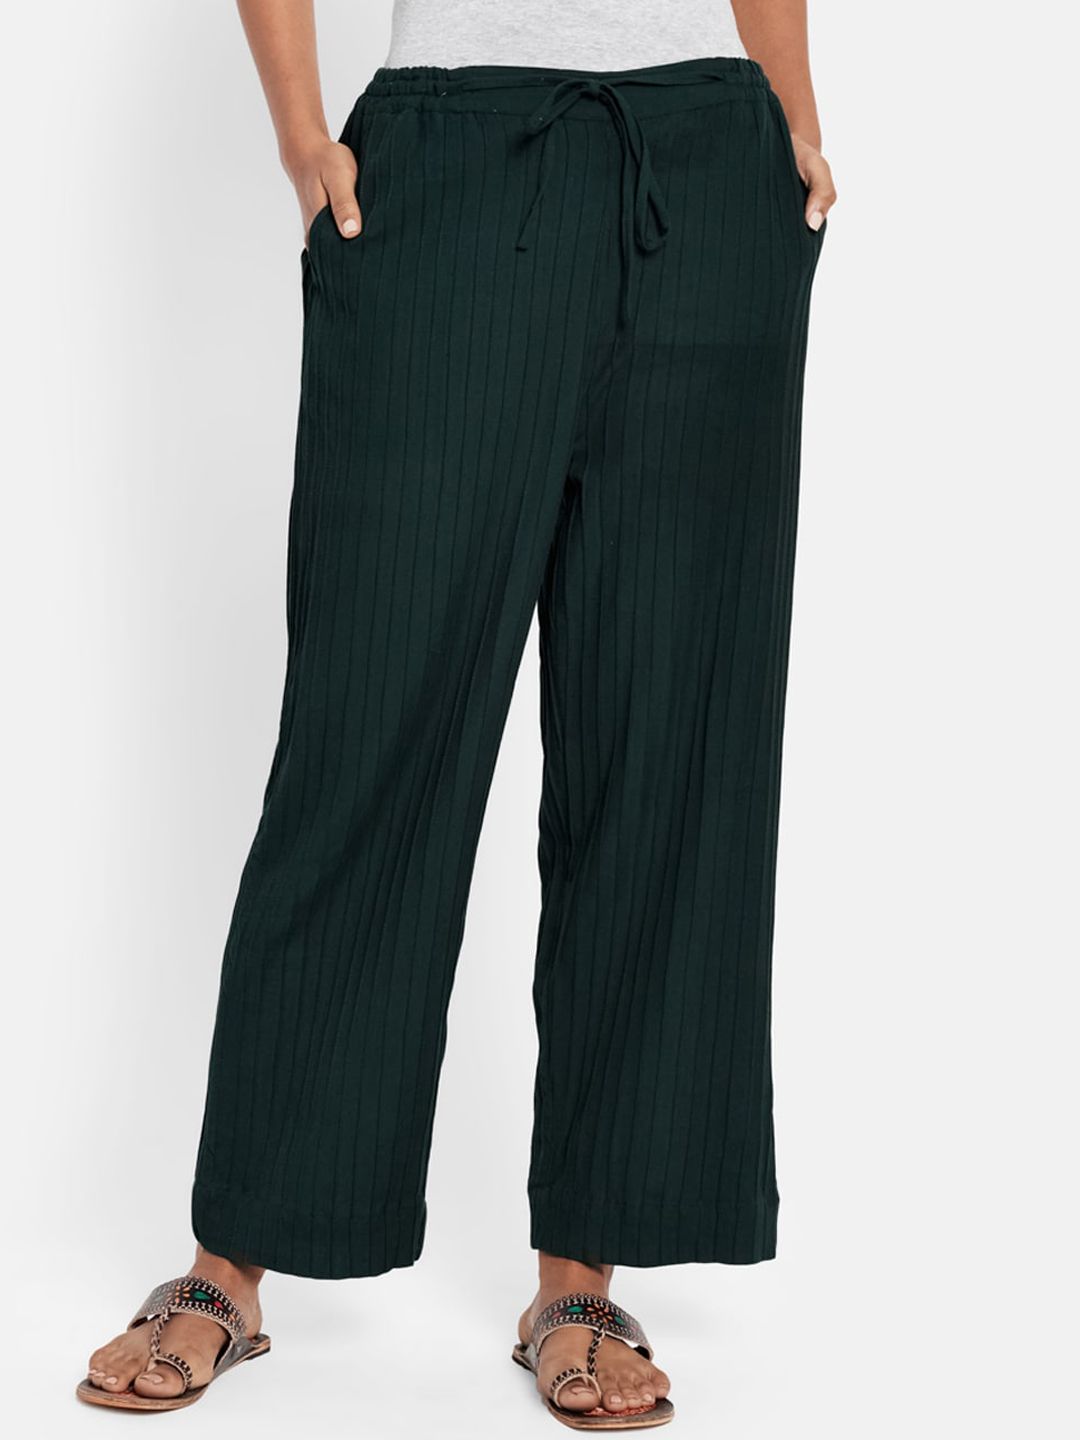 Fabindia Women Green Solid Cotton Parallel Trousers Price in India